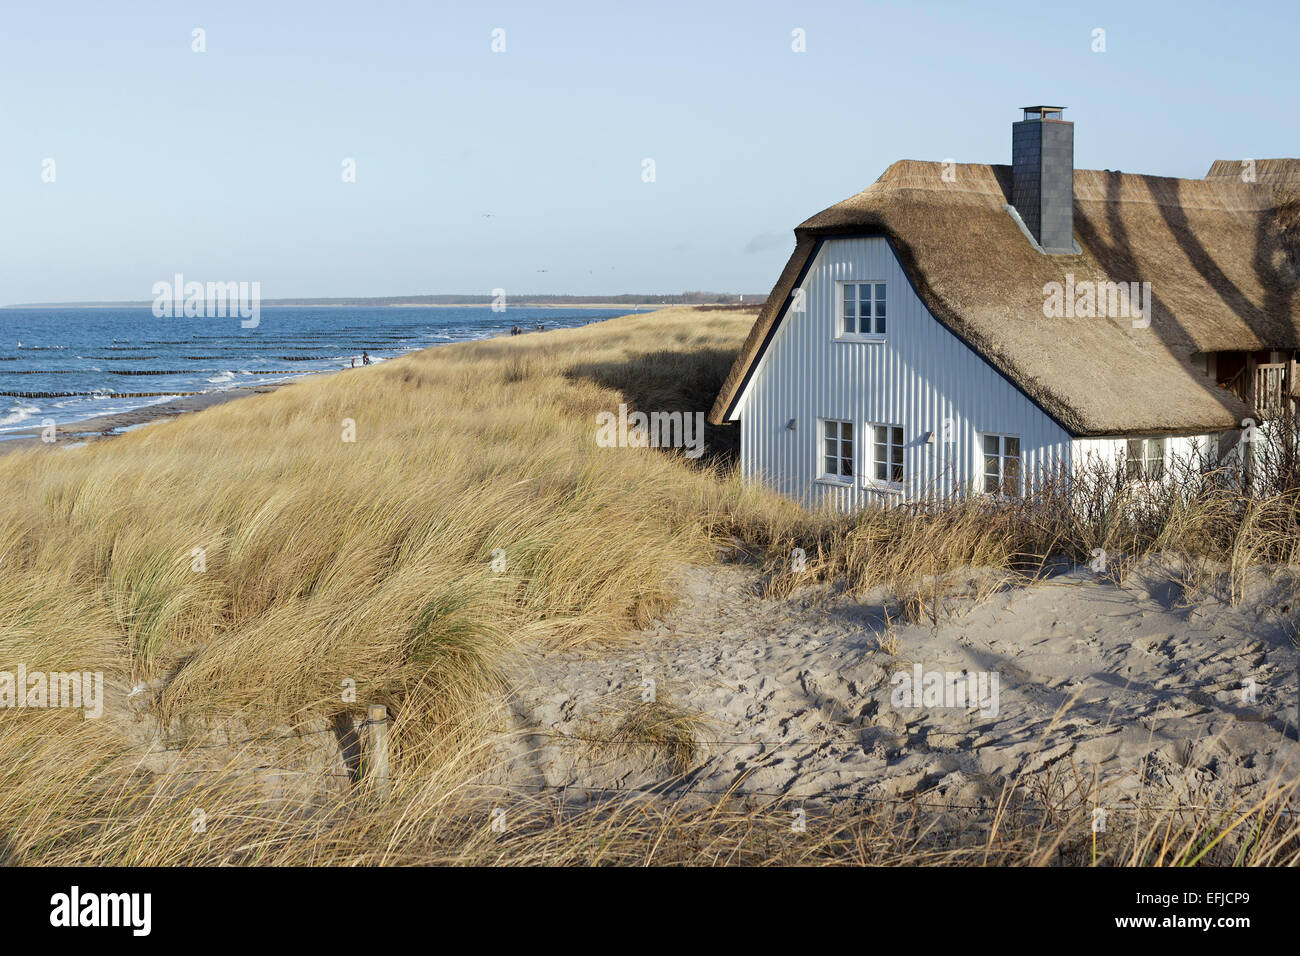 thatched house at the beach, Ahrenshoop, Mecklenburg-West Pomerania, Germany Stock Photo